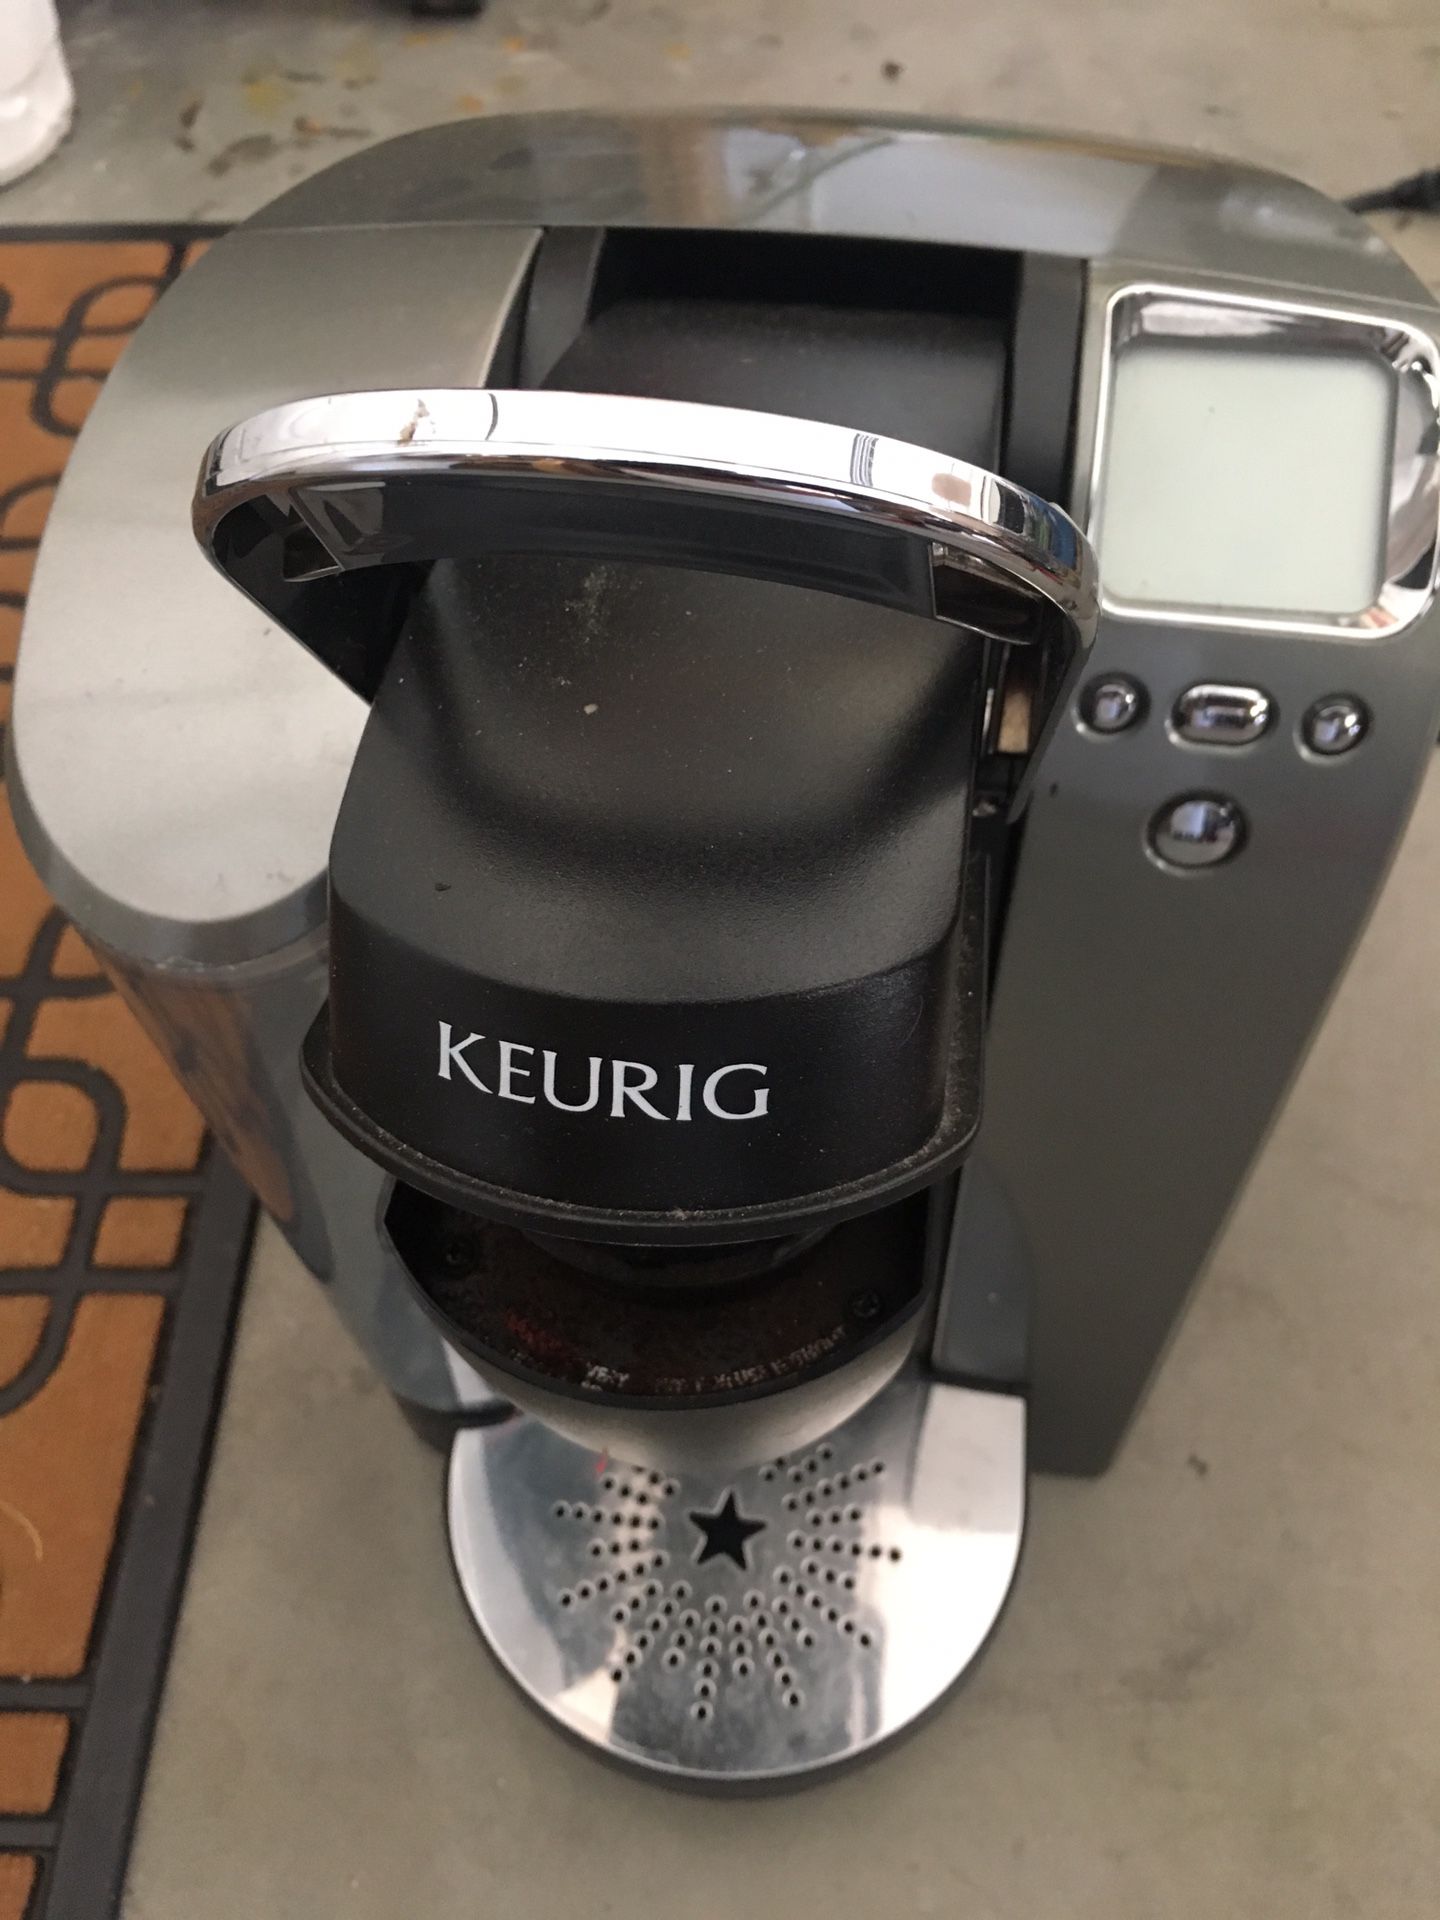 Keurig used for a month